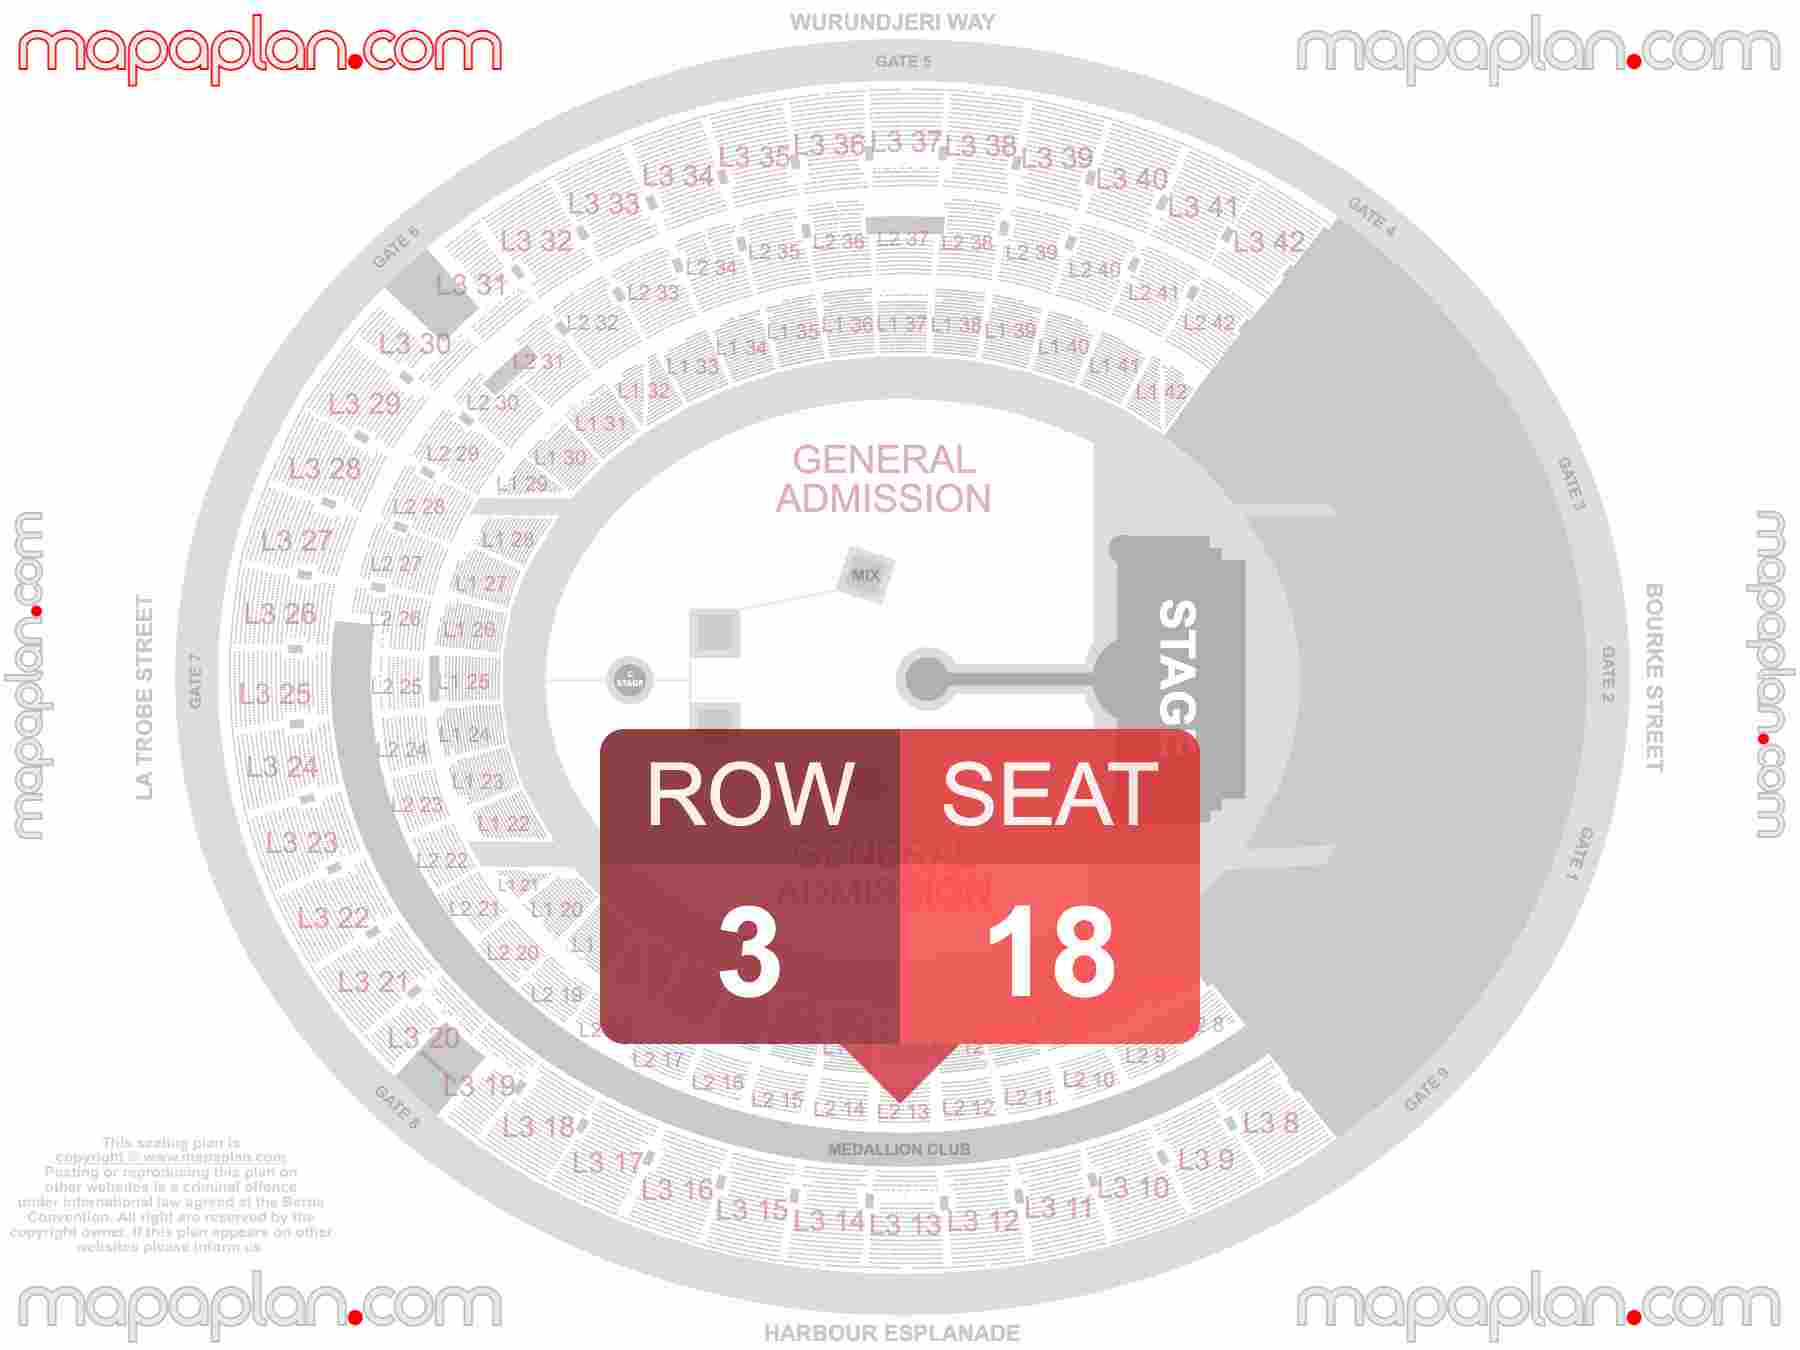 Melbourne Marvel Stadium seating map Concert with catwalk extended runway concert B-stage find best seats row numbering system plan showing how many seats per row - Individual 'find my seat' virtual locator